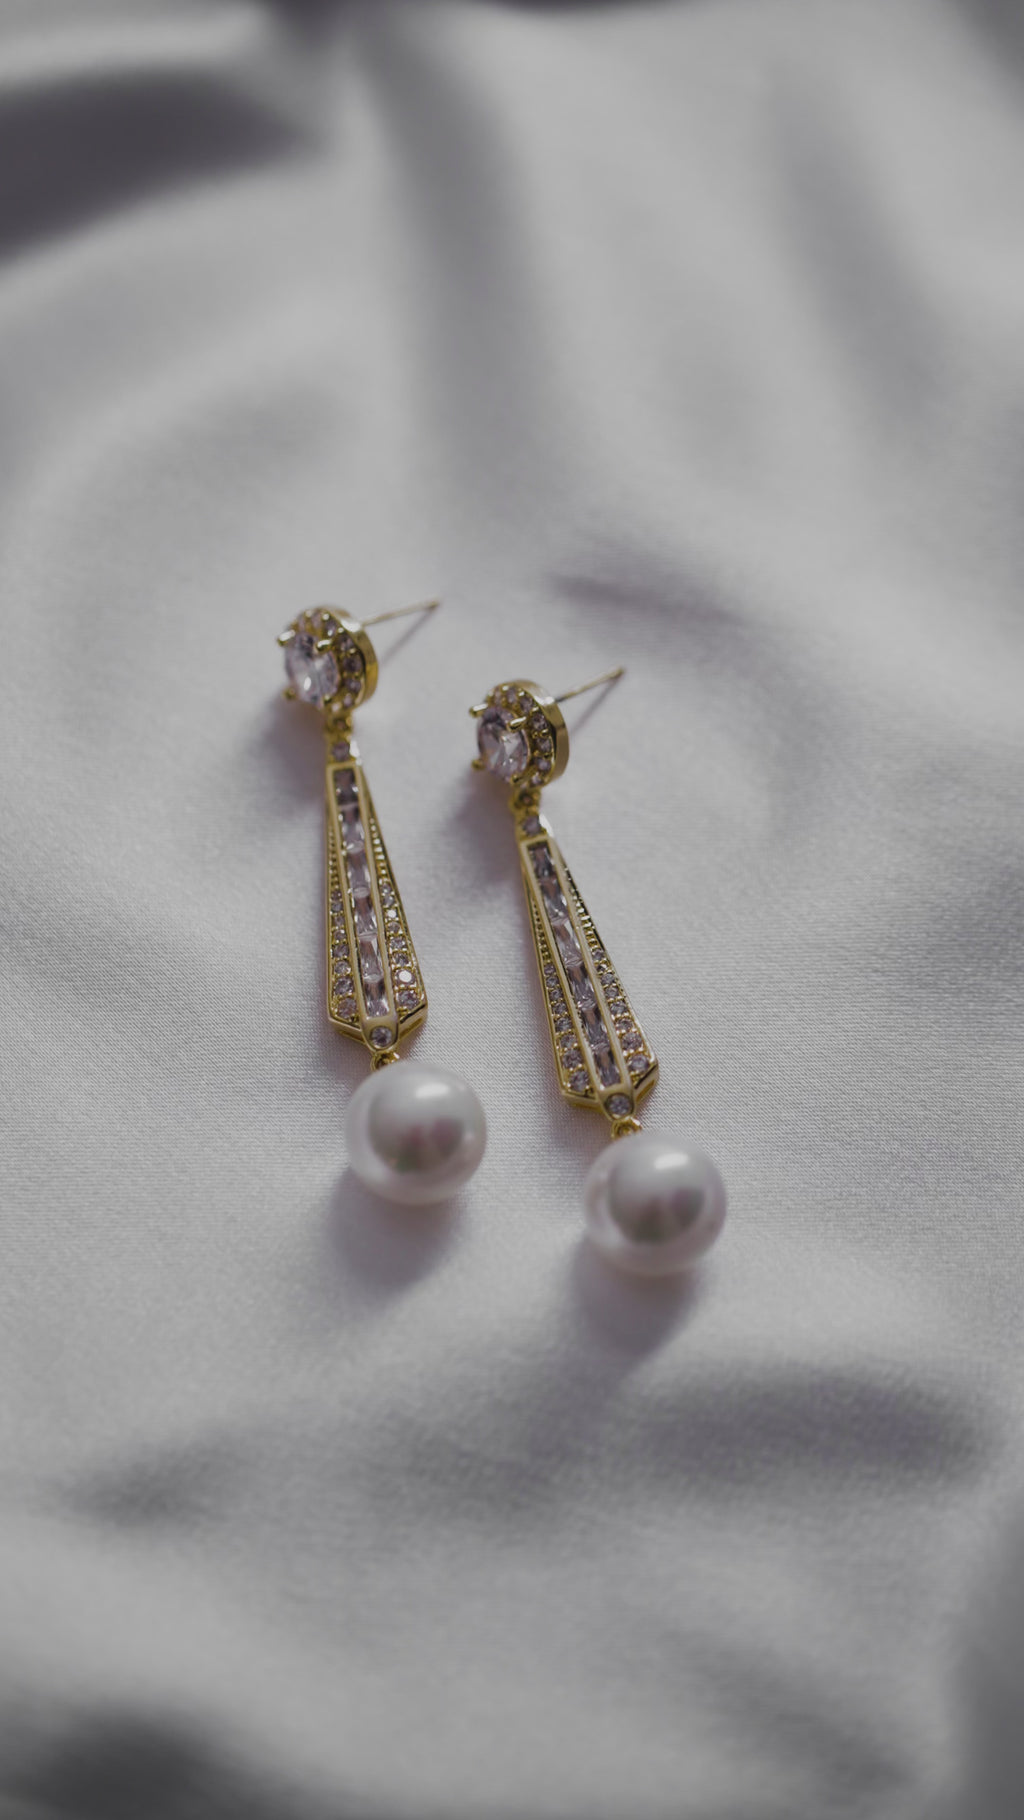 Riley bridal earrings pearl and crystal gold